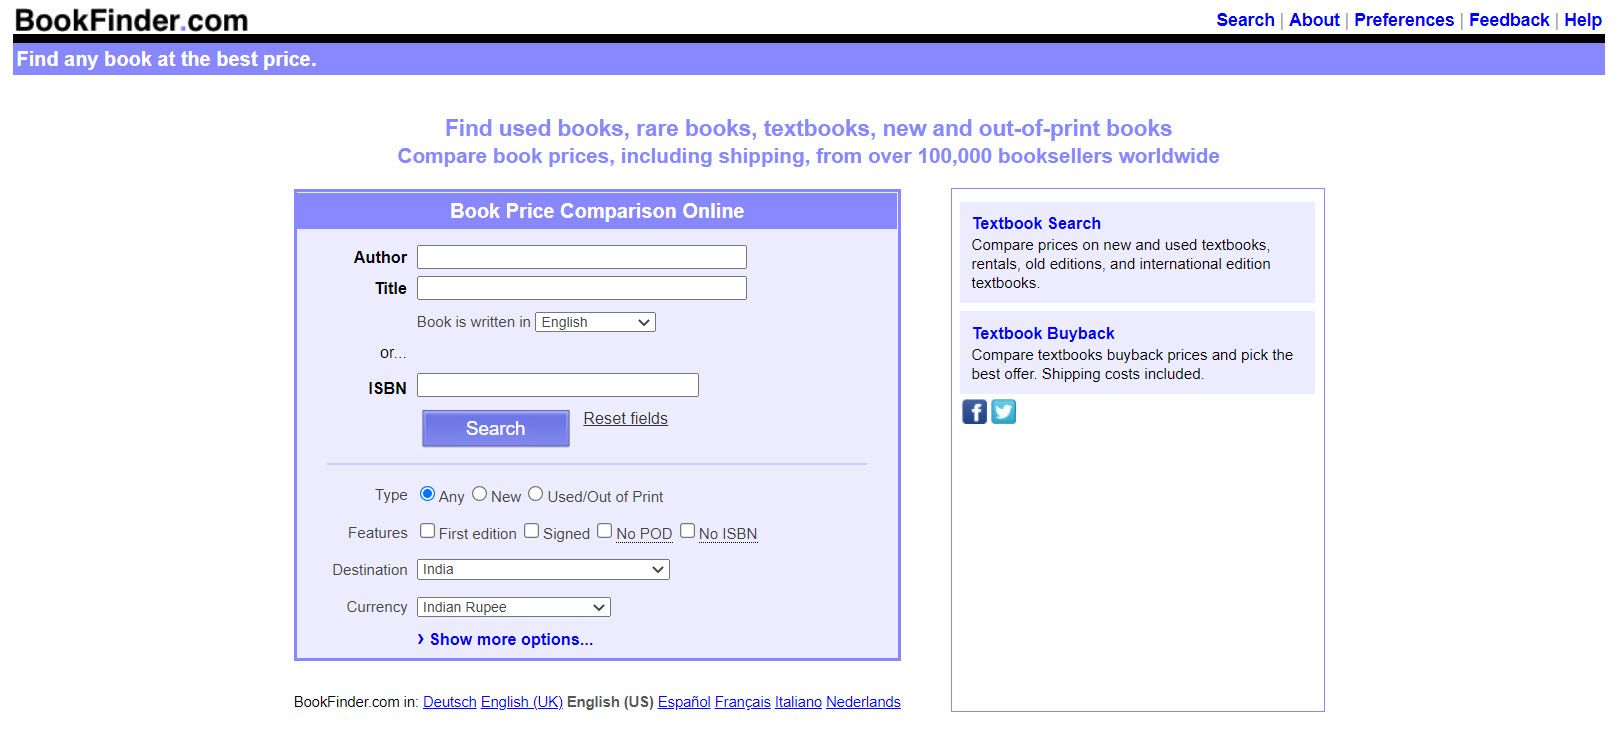 Book Finder Search is for finding books, first editions, and out of print books